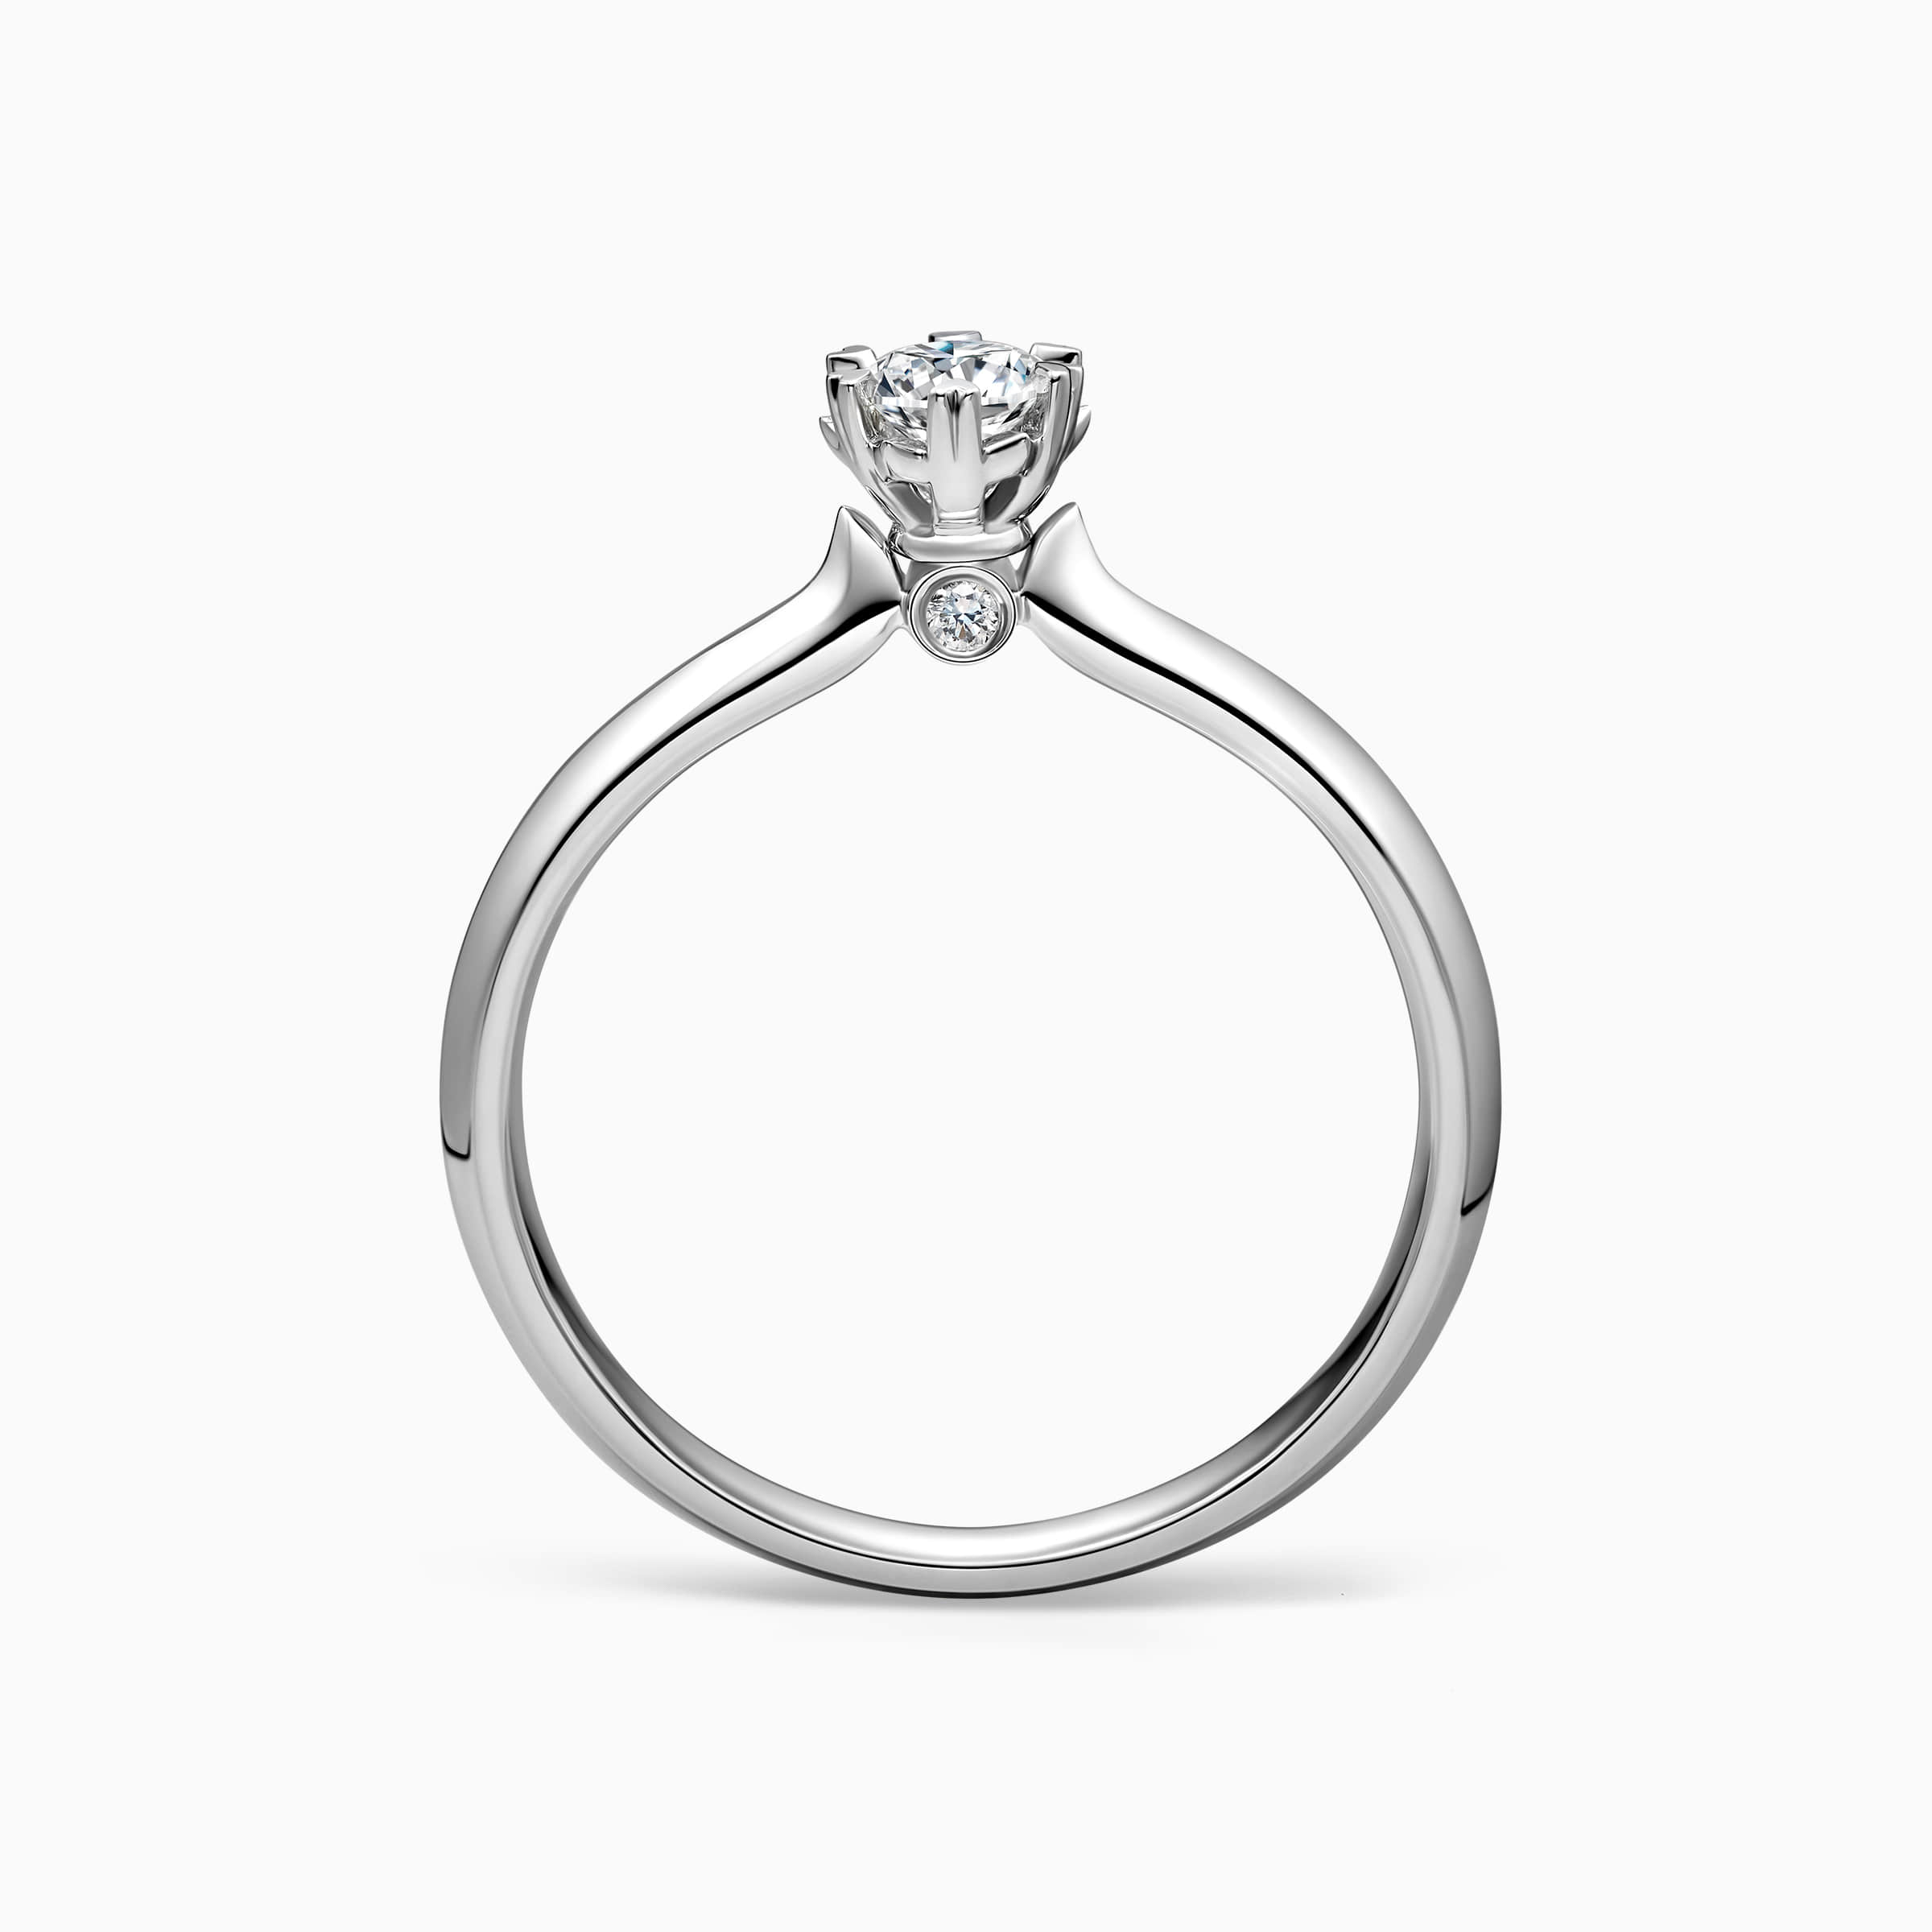 Darry Ring snowflake diamond promise ring front view